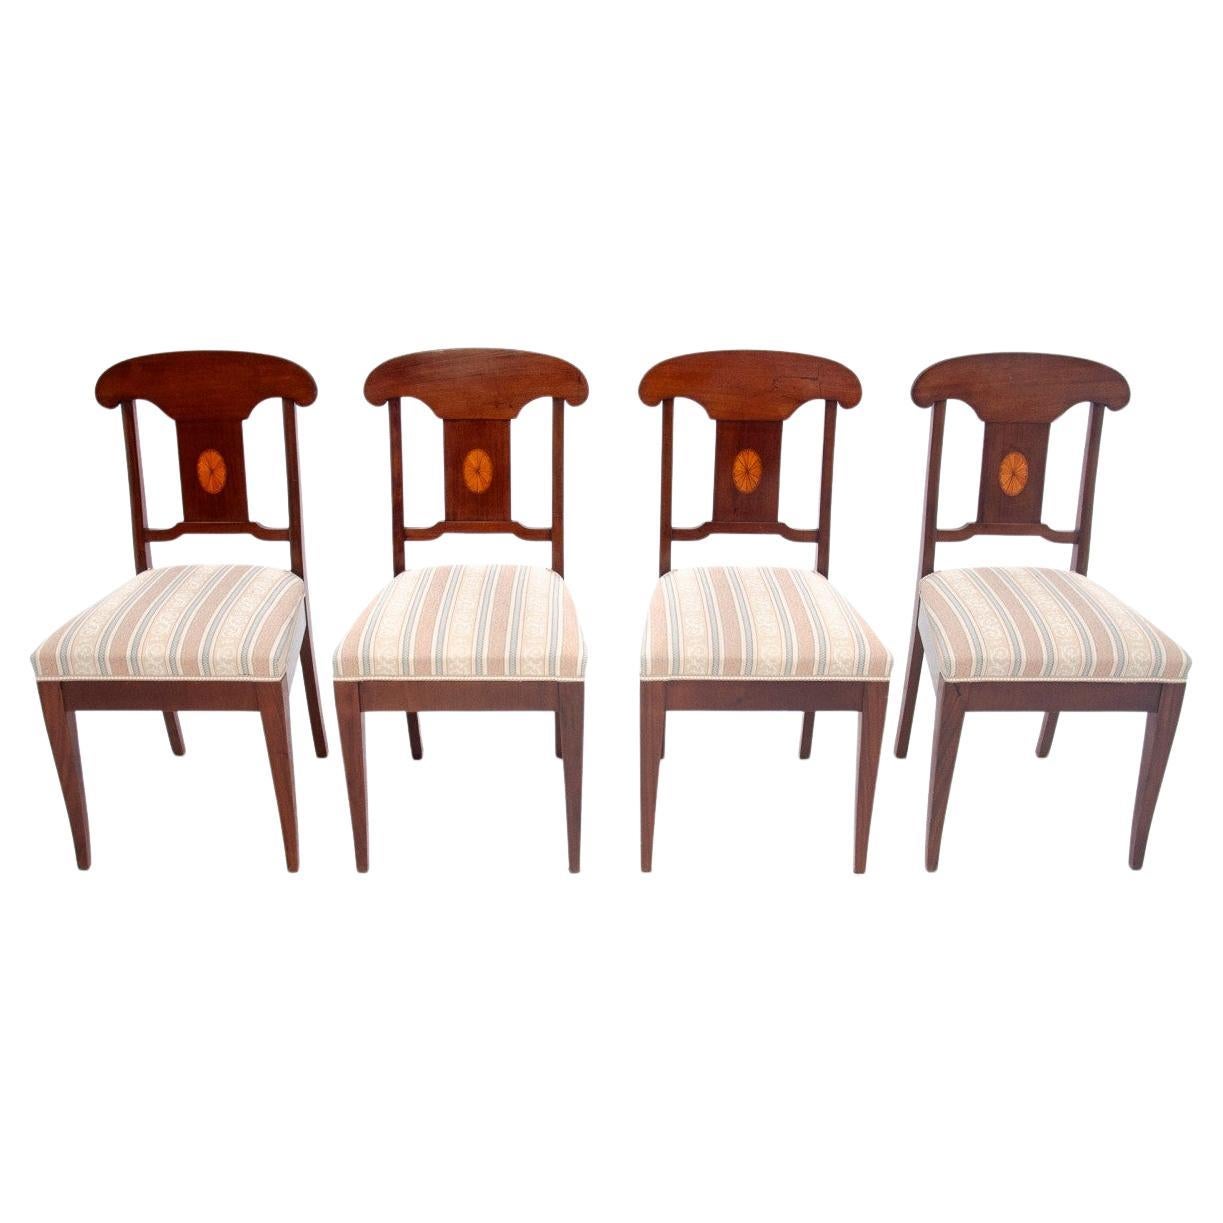 A set of chairs from the mid-19th century, Northern Europe. For Sale